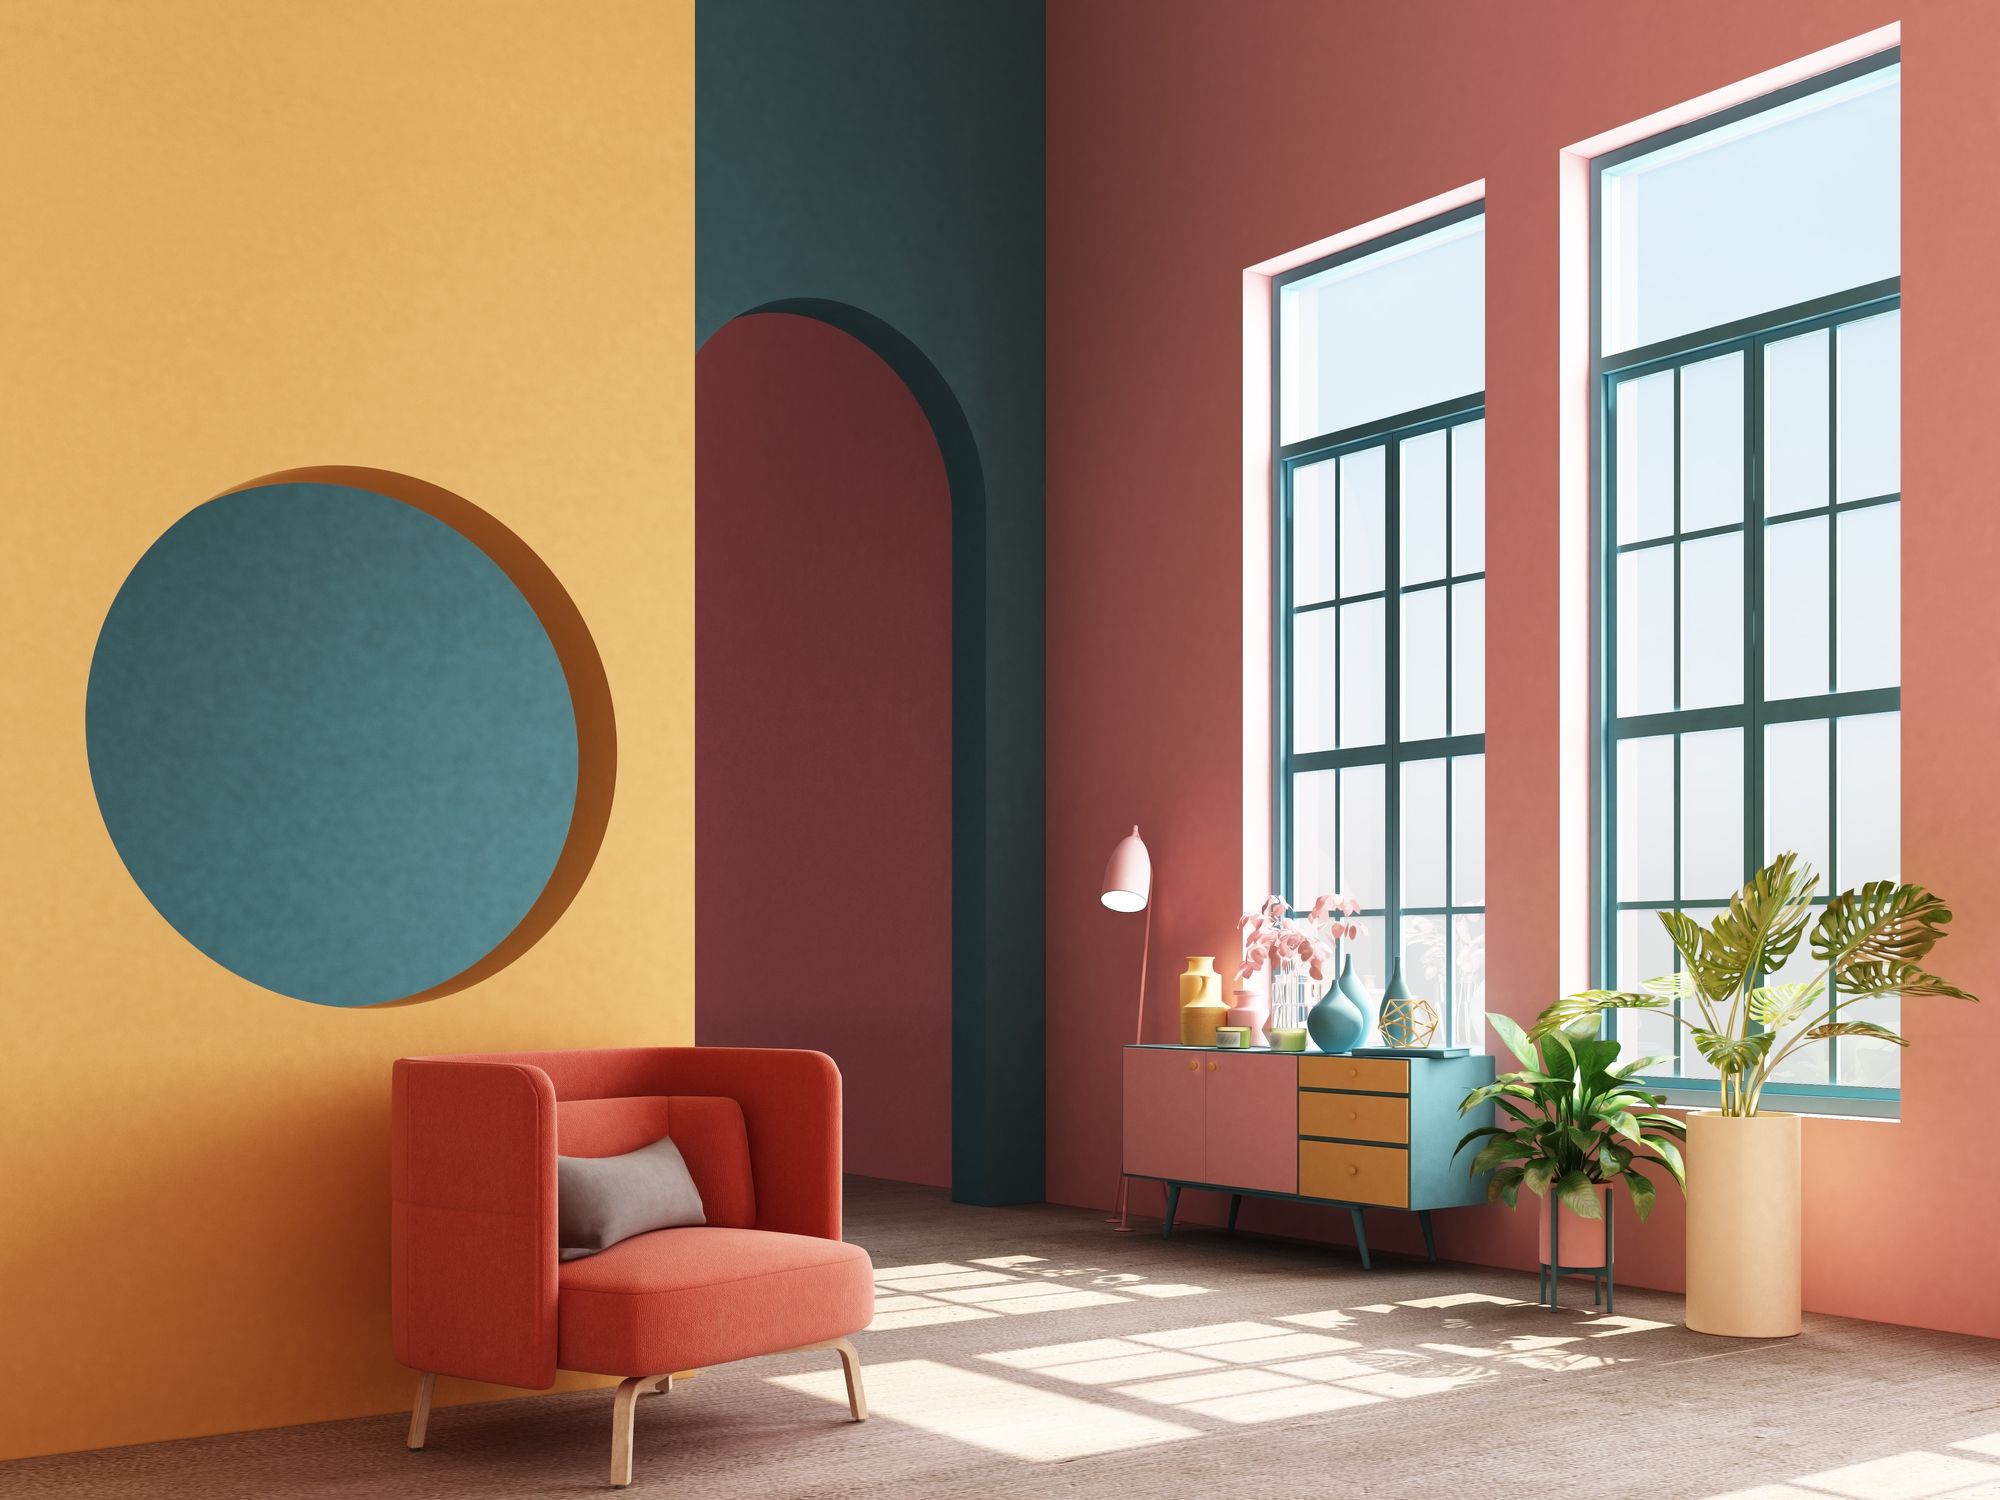 2023 Home Decor Trends & Aesthetics For Gen Z, According To Experts